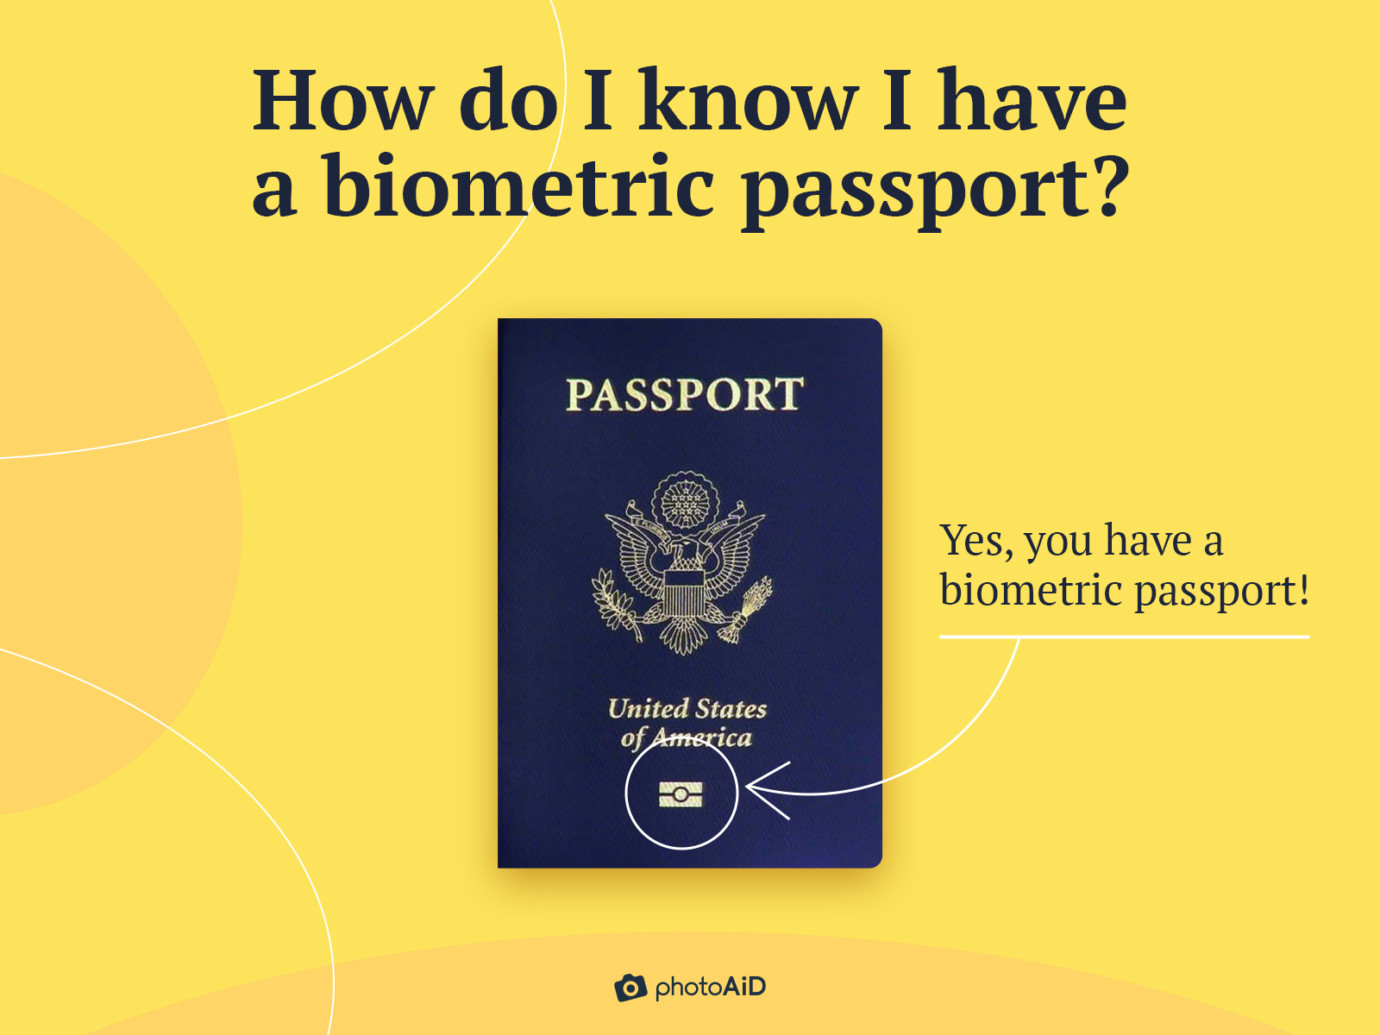 An image showing how to know if the U.S. citizen has a biometric passport, marking the gold-colored camera logo on the front cover of the booklet.